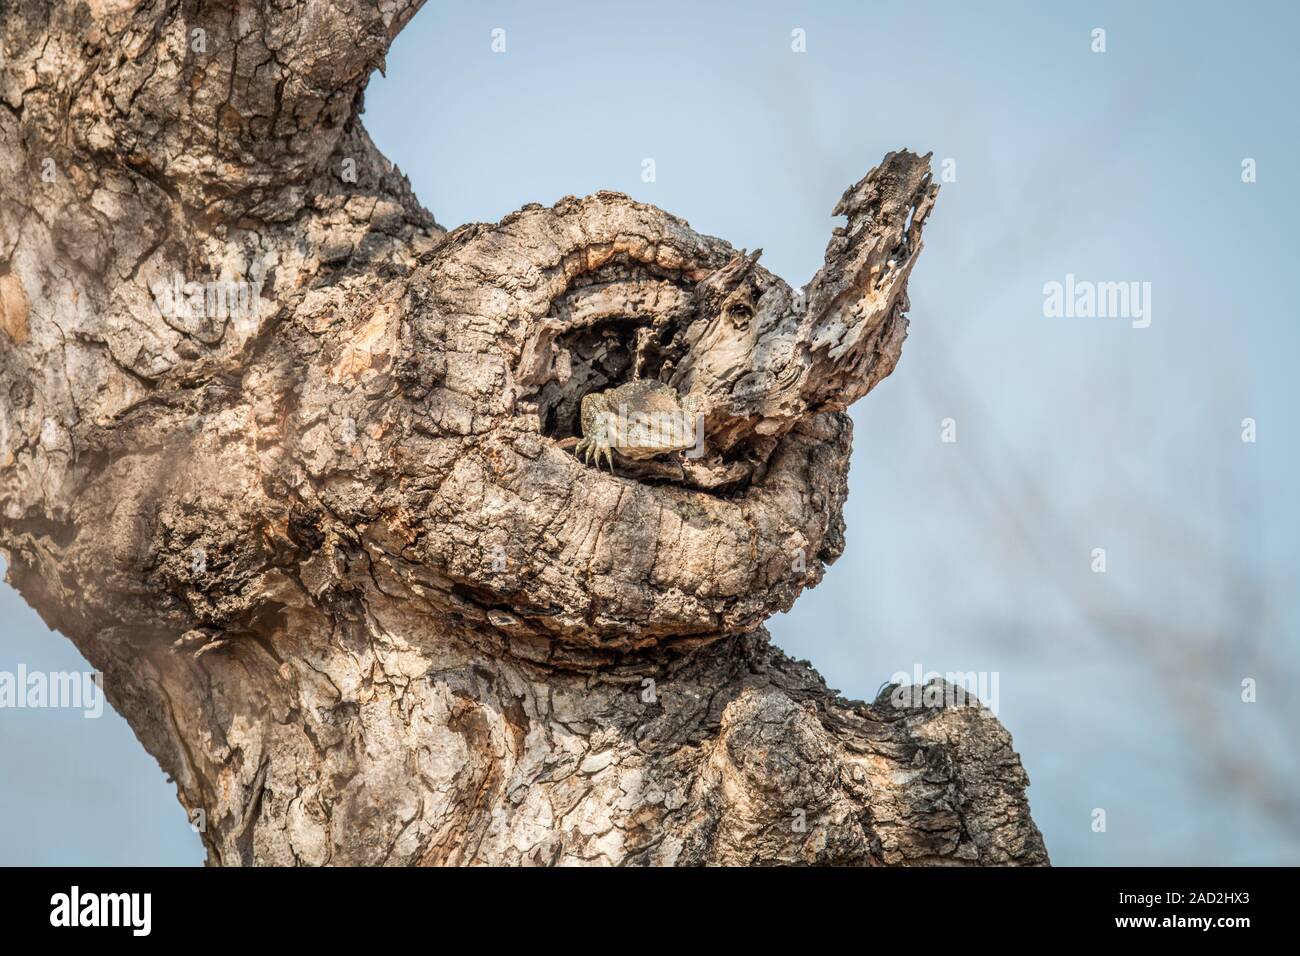 Rock monitor in a tree. Stock Photo